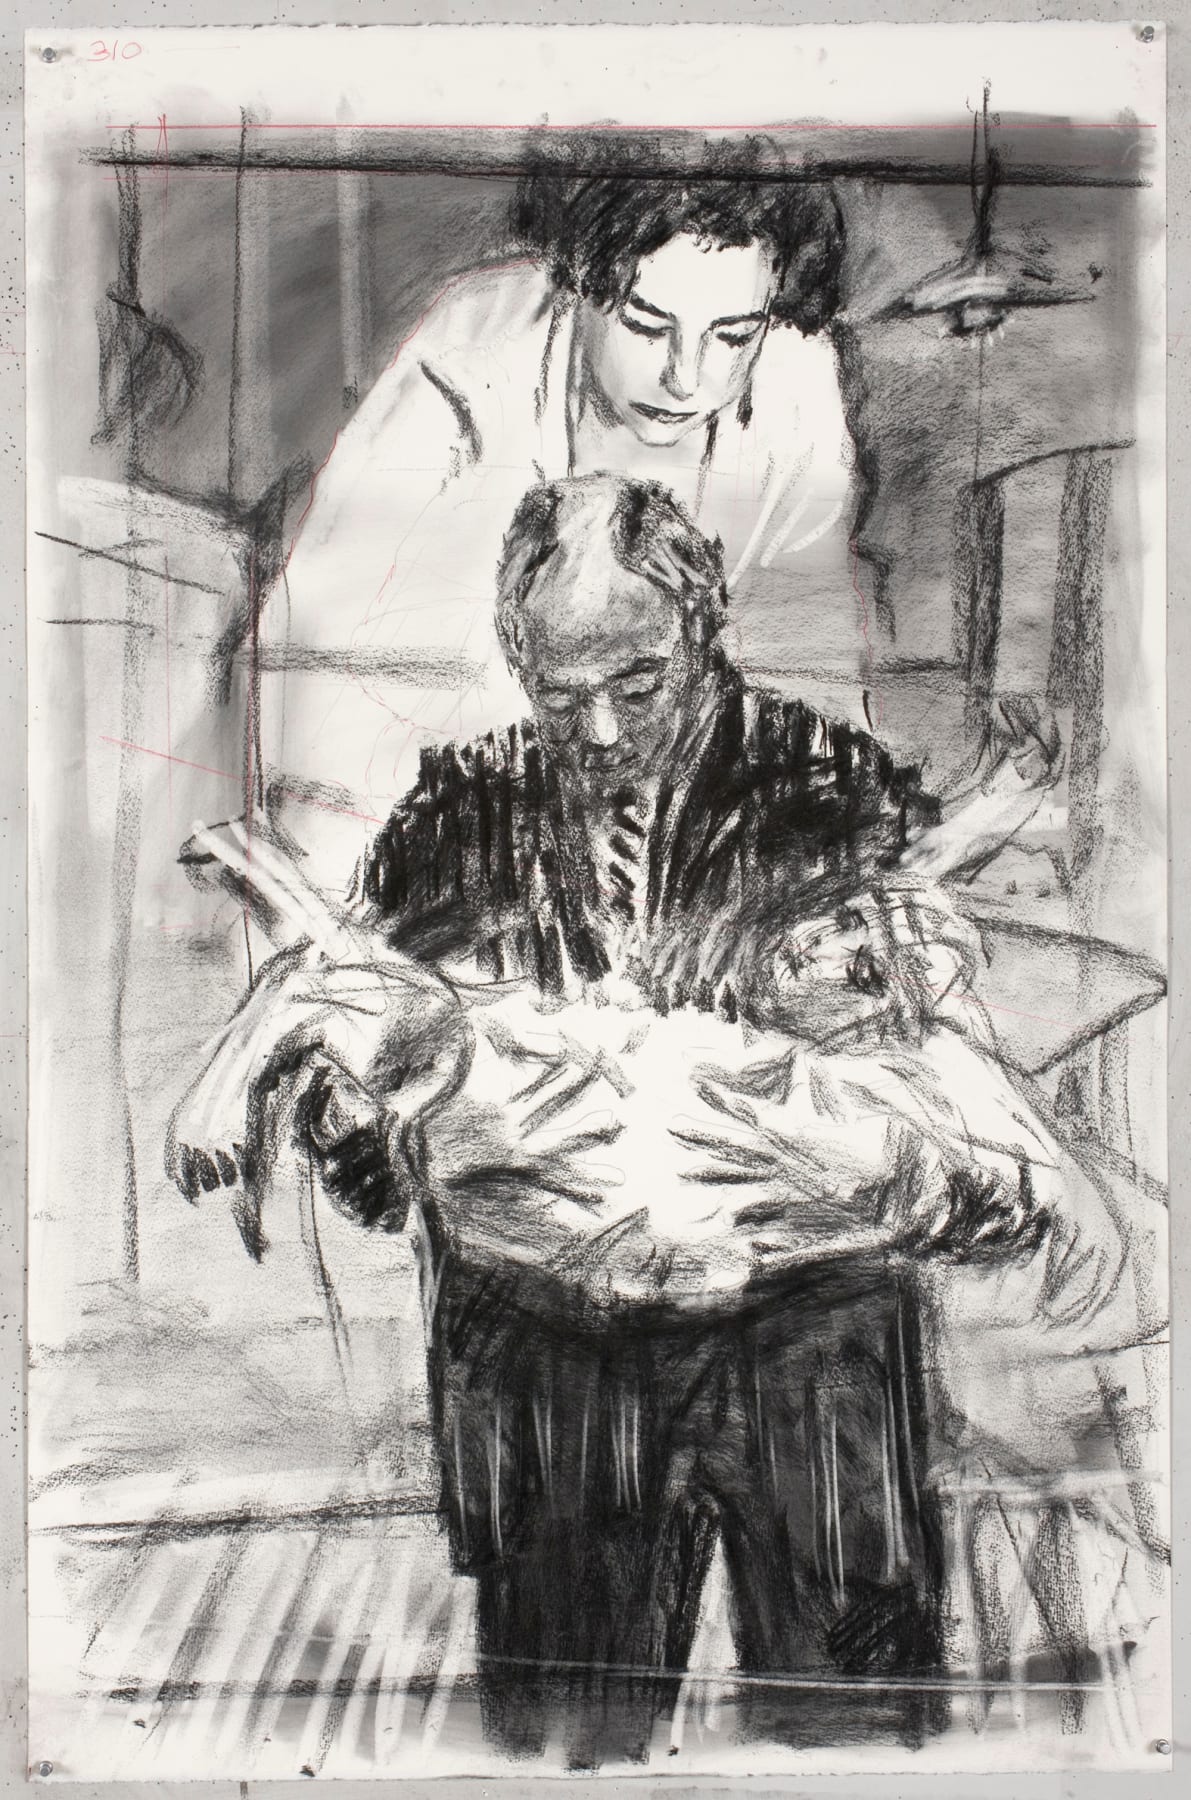 William Kentridge, Drawing for 'Other Faces', 2011